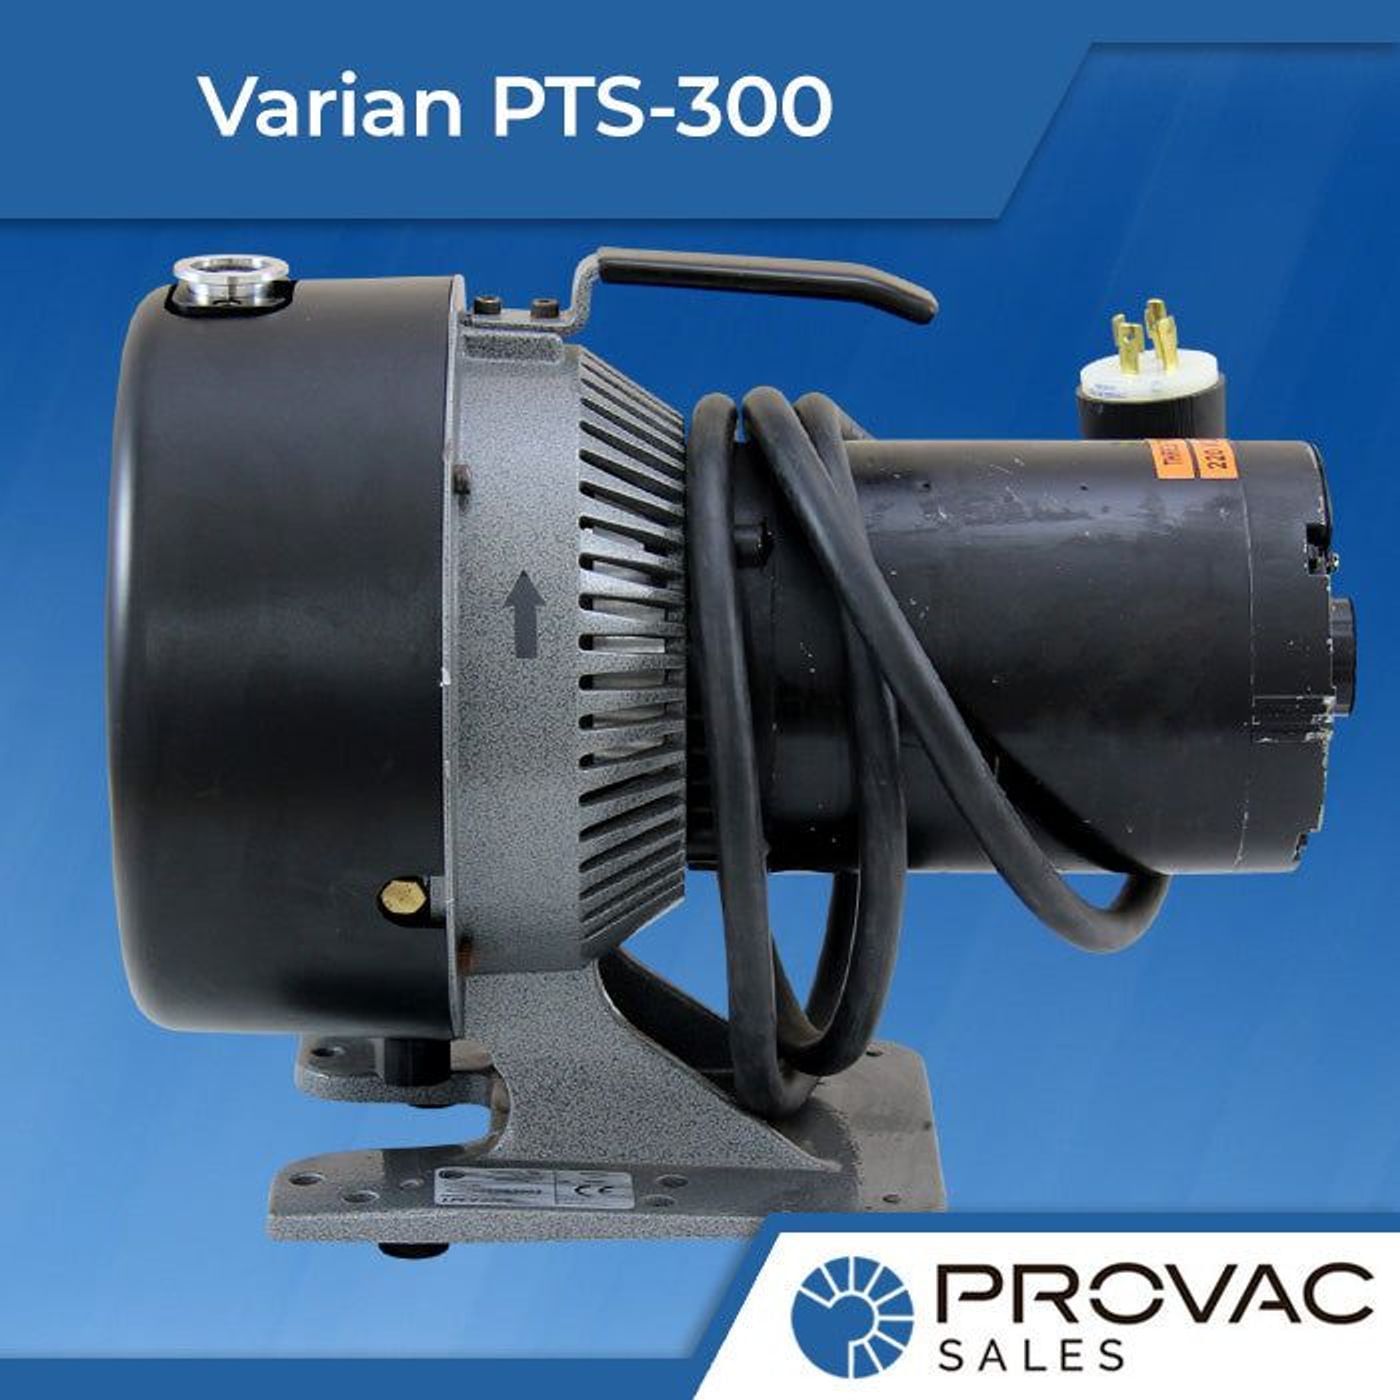 Varian PTS-300 Scroll Pump: In Stock, Ready To Ship